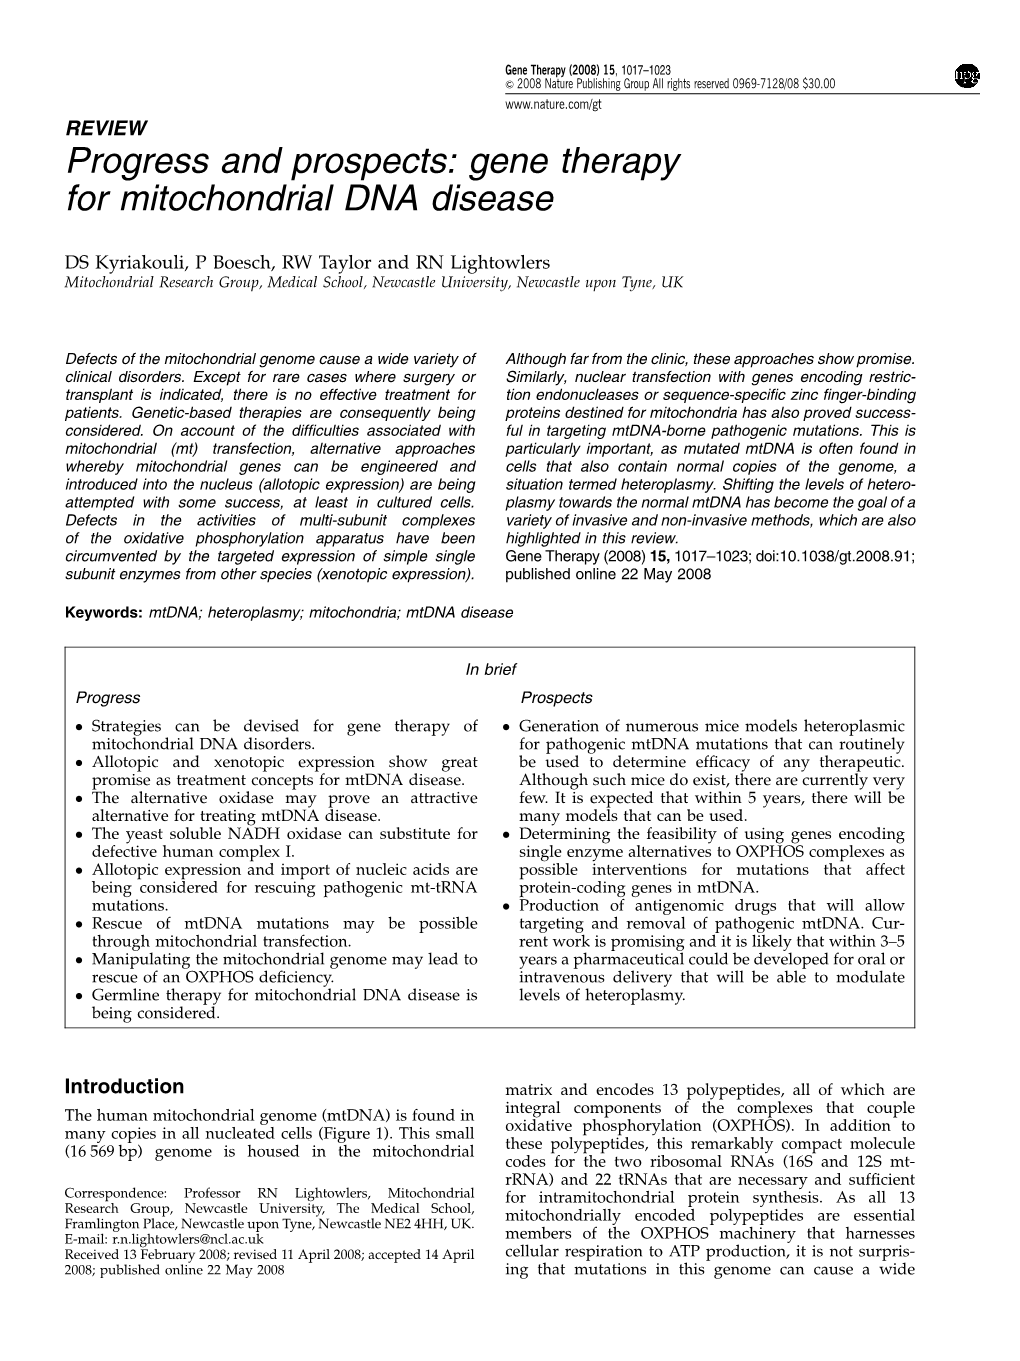 Gene Therapy for Mitochondrial DNA Disease